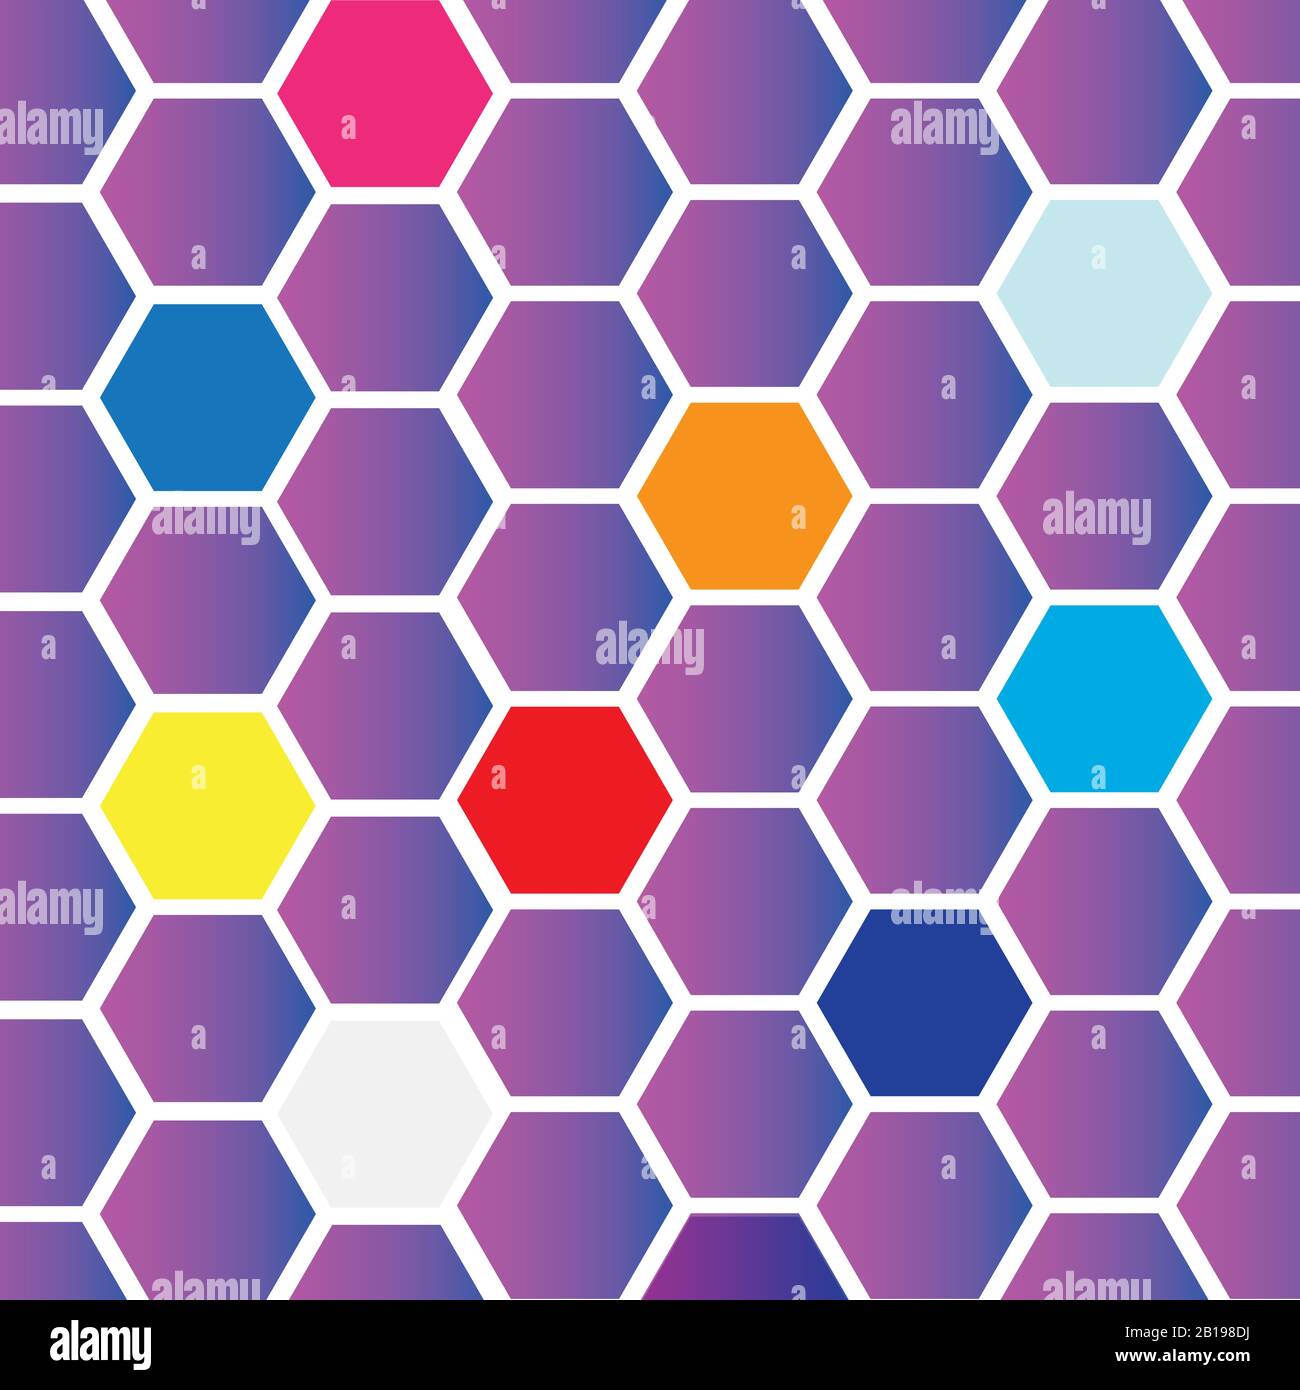 System of hexagons, and some random colors, vector image Stock Vector